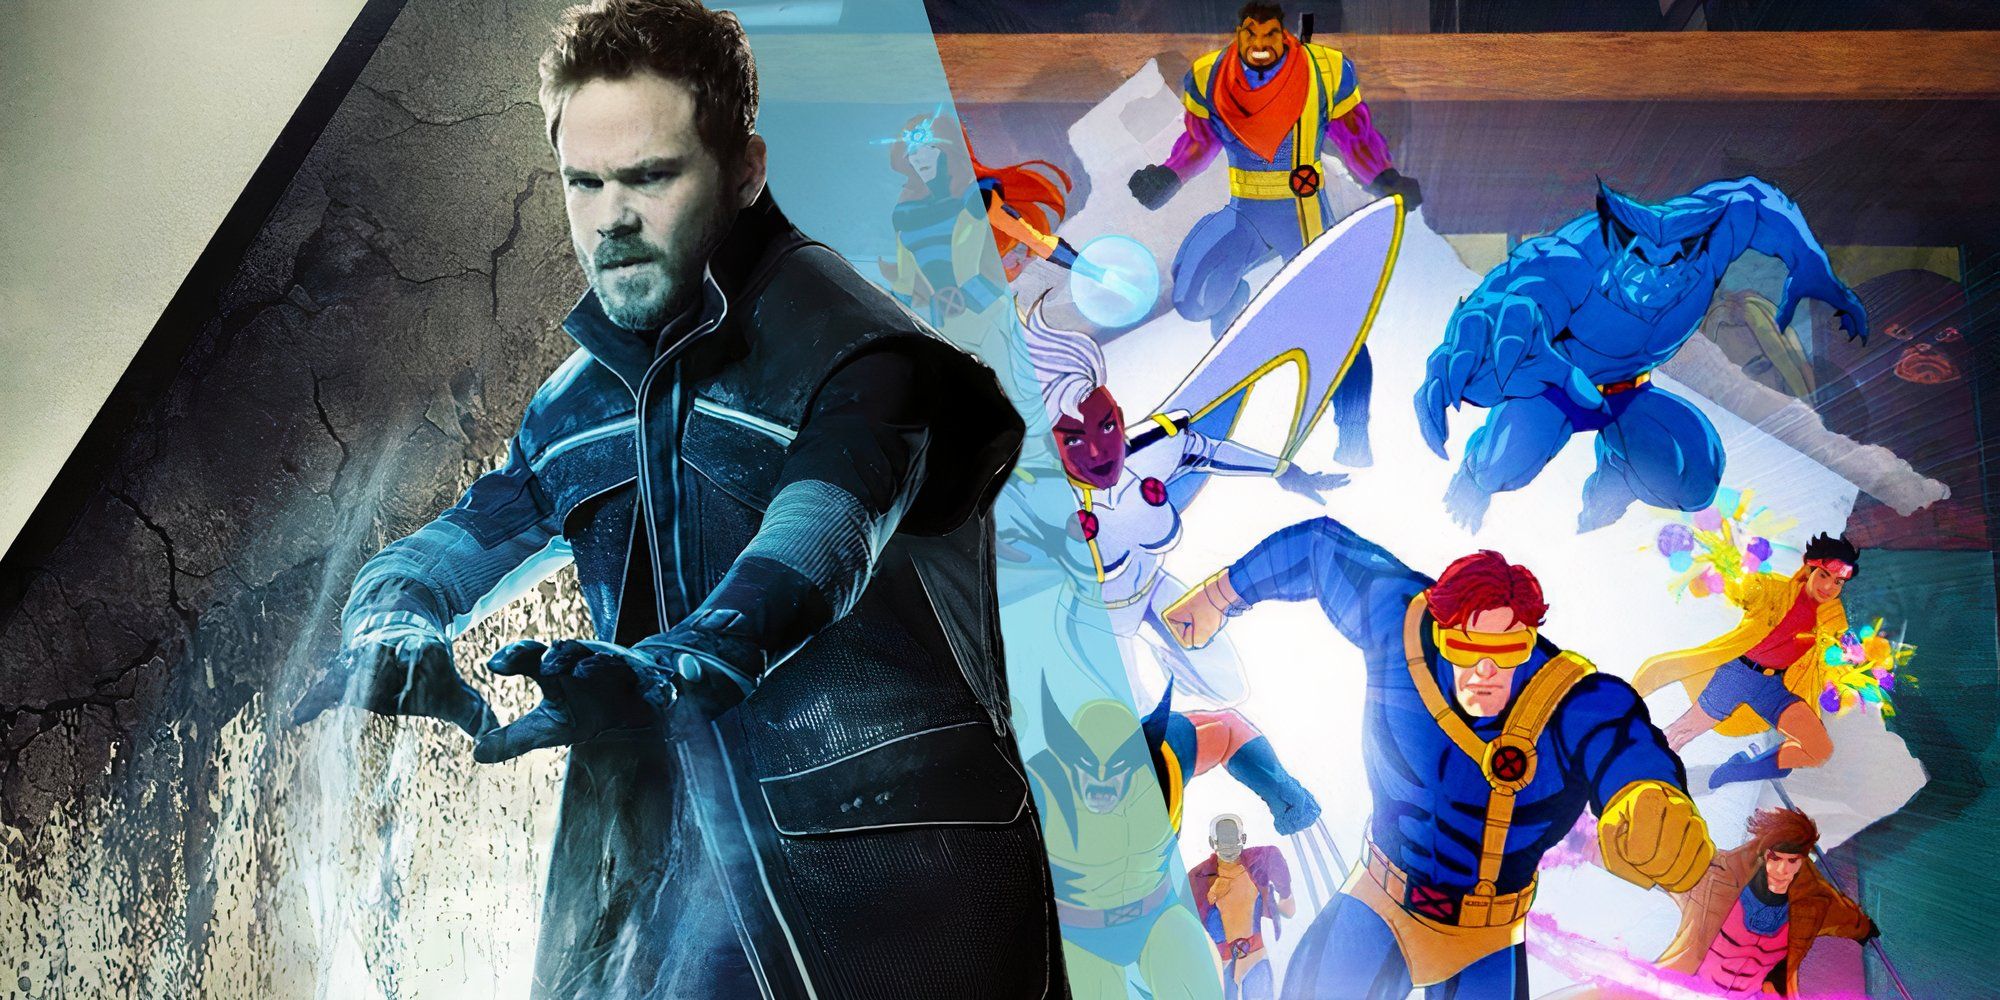 The poster for X-Men '97 (2024) next to Shawn Ashmore posing as Iceman in the poster for X-Men: Days of Future Past (2014)